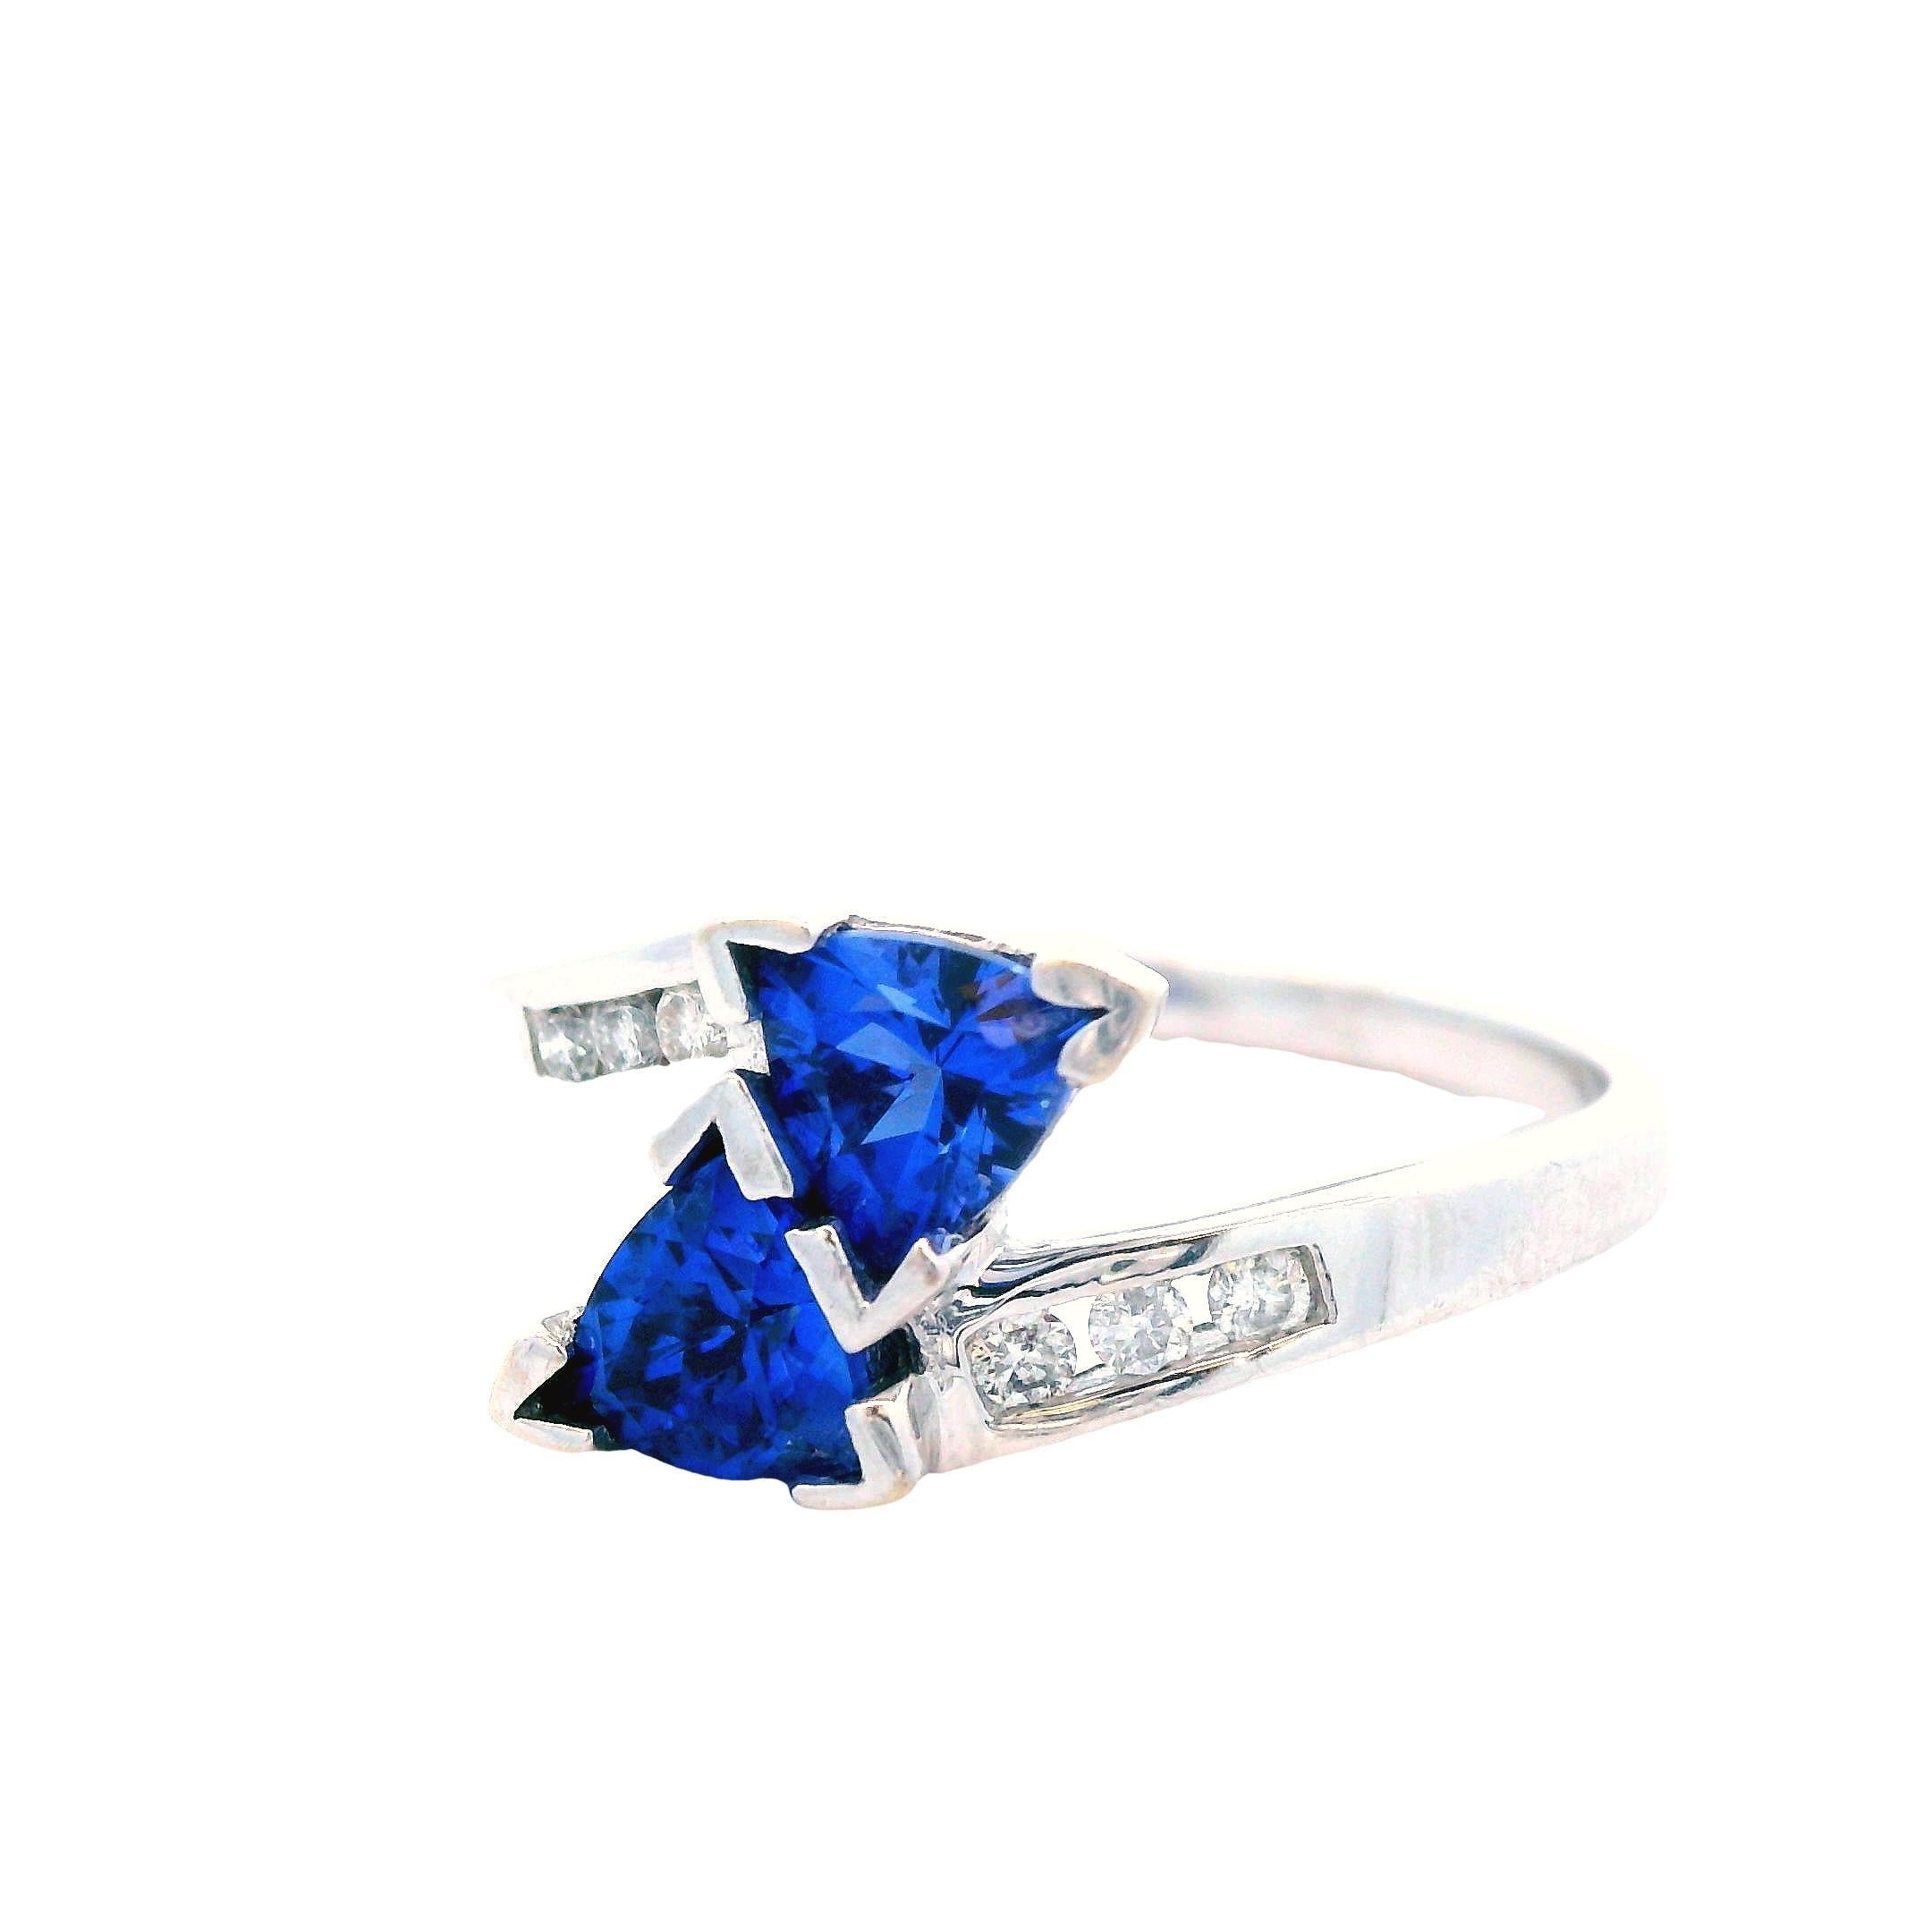 This is an absolutely stunning ring in 14k white gold featuring diamond accents and two breathtaking trillion cut tanzanite center stones! The ring has an elegant overlapping style that puts the tanzanite on perfect display, front and center. The